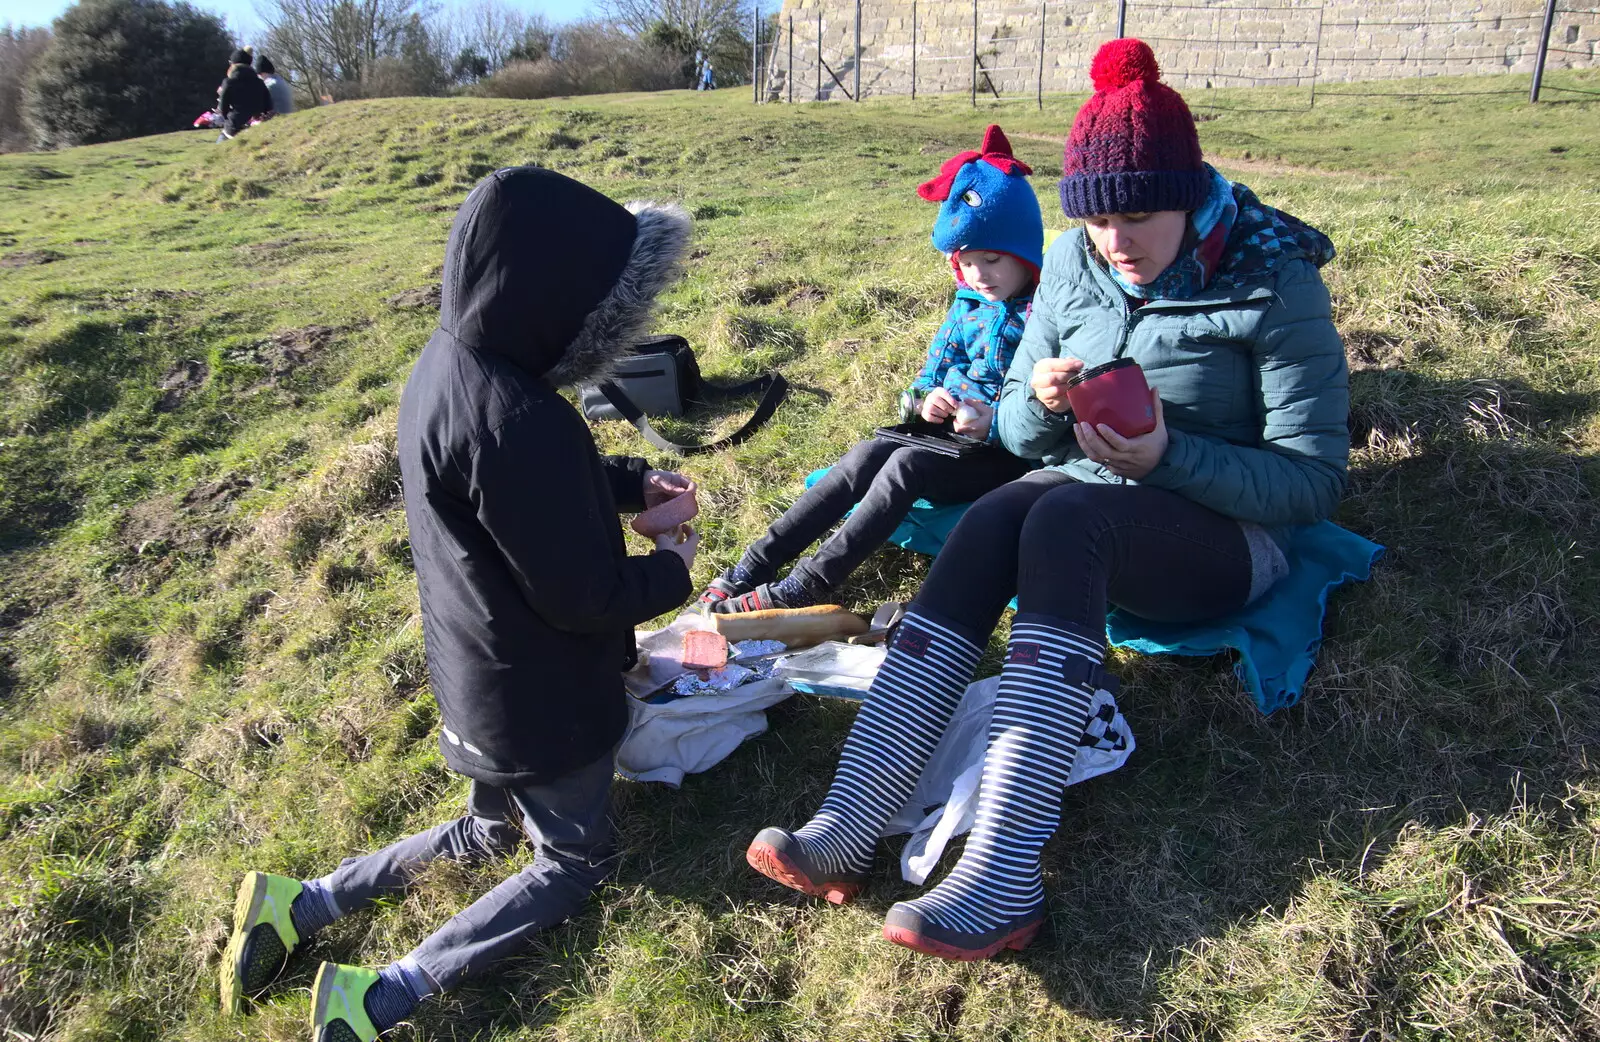 We have a micro-picnic, from An Orford Day Out, Orford, Suffolk - 17th February 2018